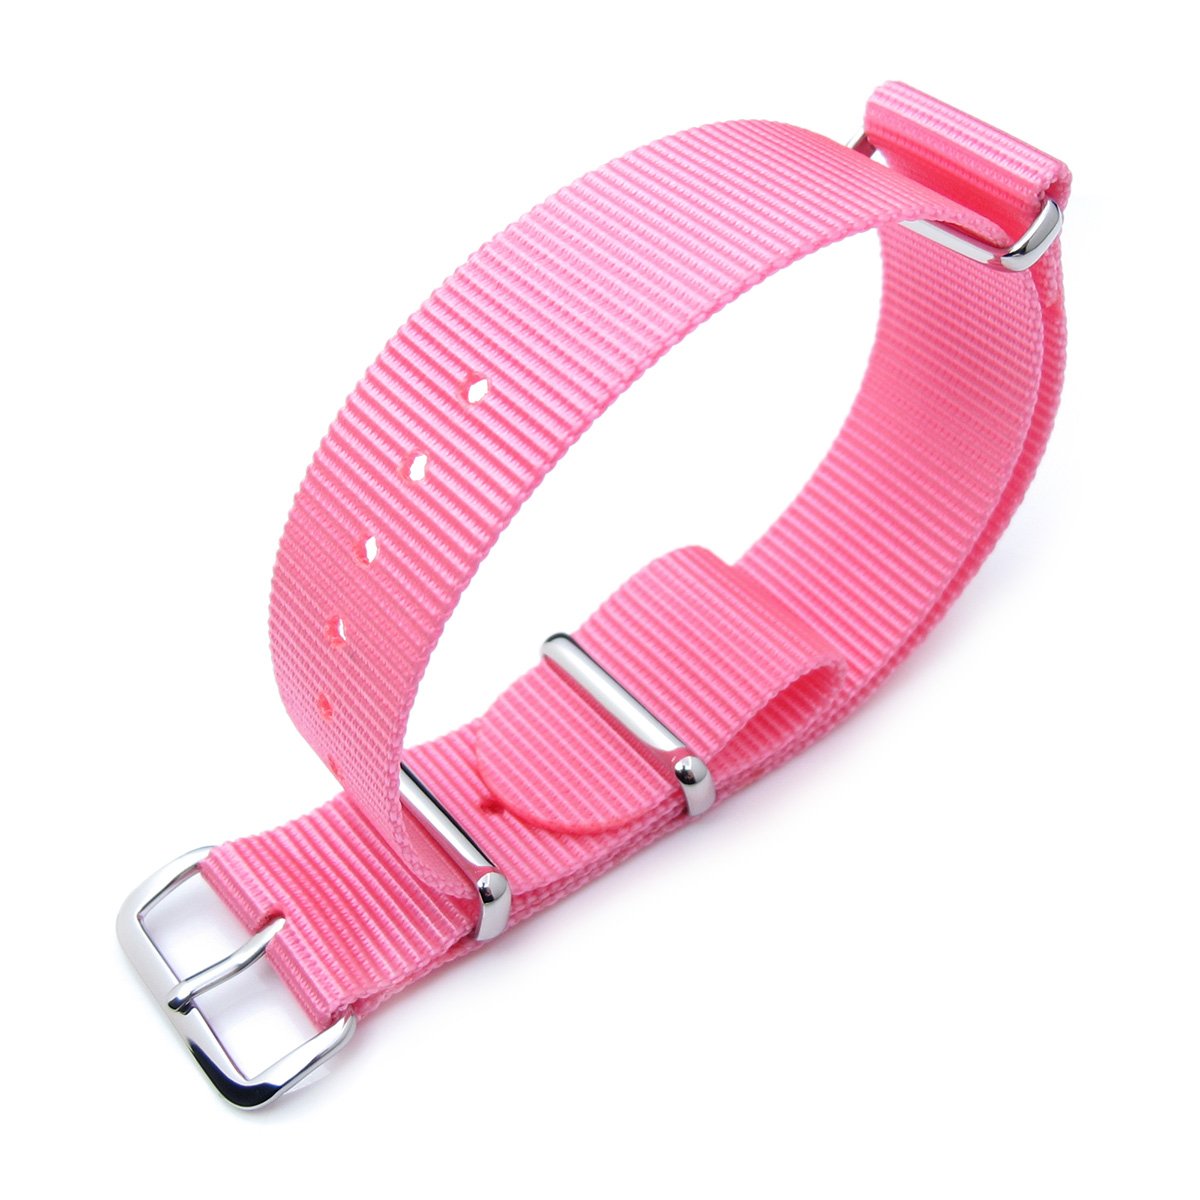 MiLTAT 18mm or 20mm G10 Military Watch Strap Ballistic Nylon Armband Polished Pink Strapcode Watch Bands